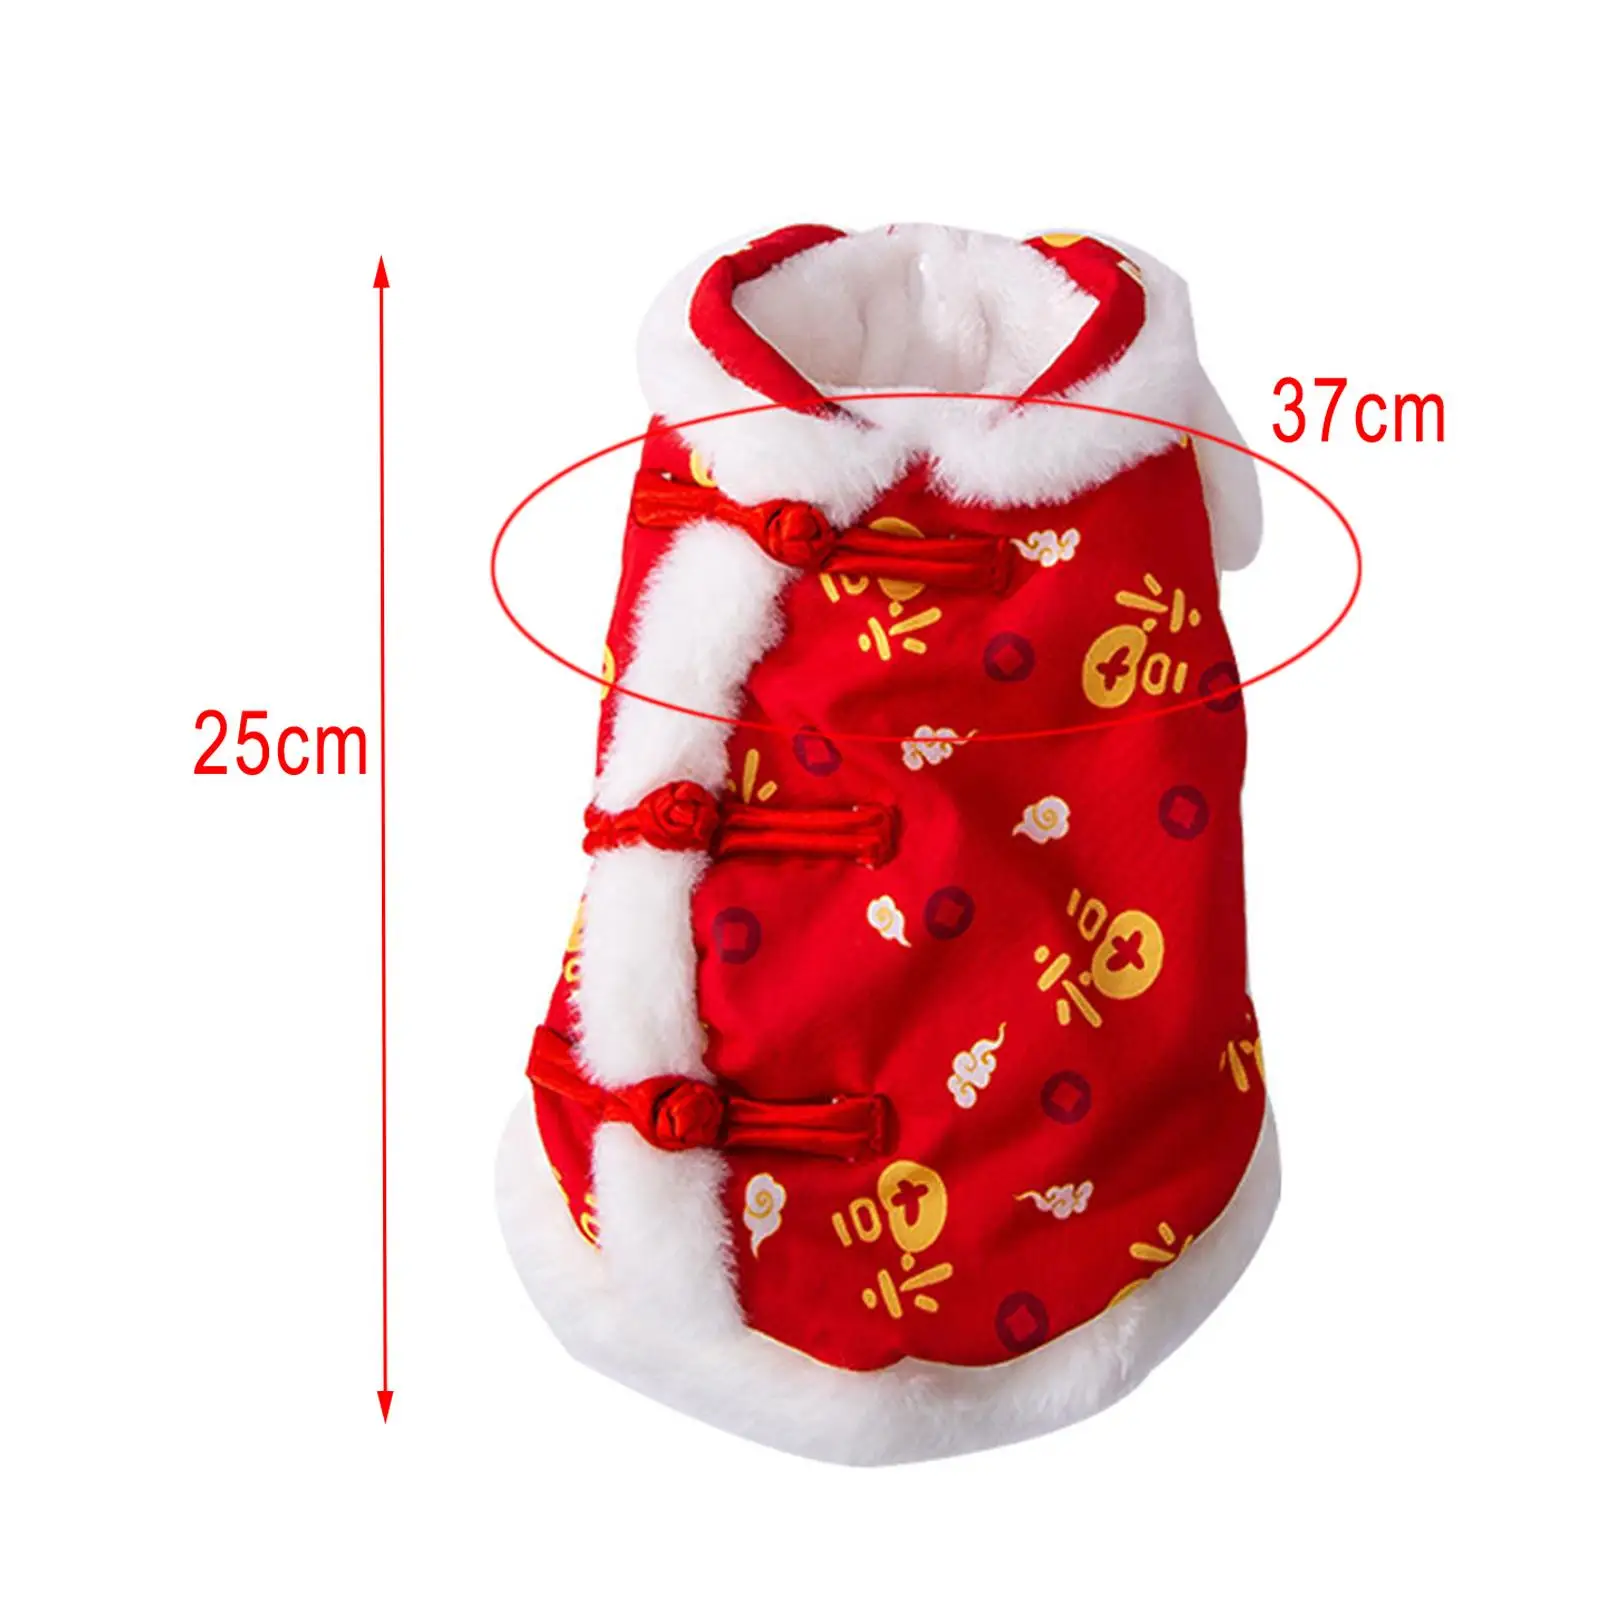 Dog Tang Suit with A Scarf Easy to Wear Outfits Comfortable Red Pet Dog Costume for Pet Gifts Cosplay Celebration Party S Code